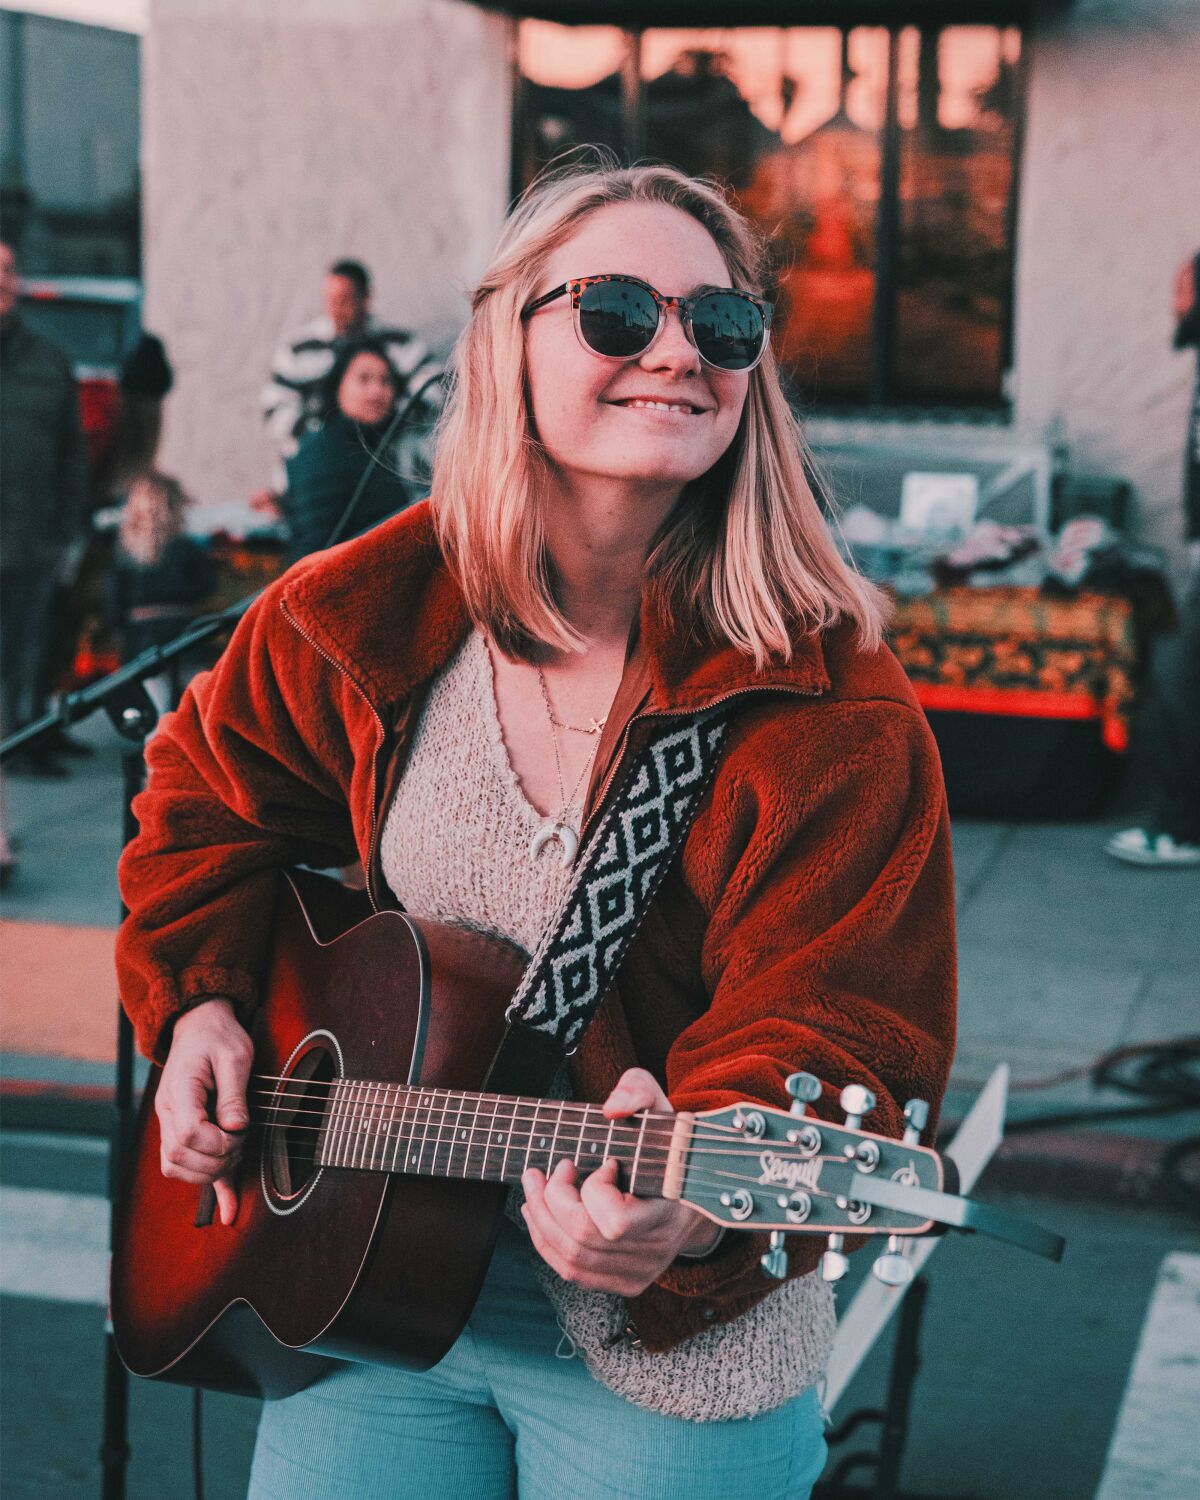 Ocean Beach musician Paige Koehler performs at an outdoor gig.